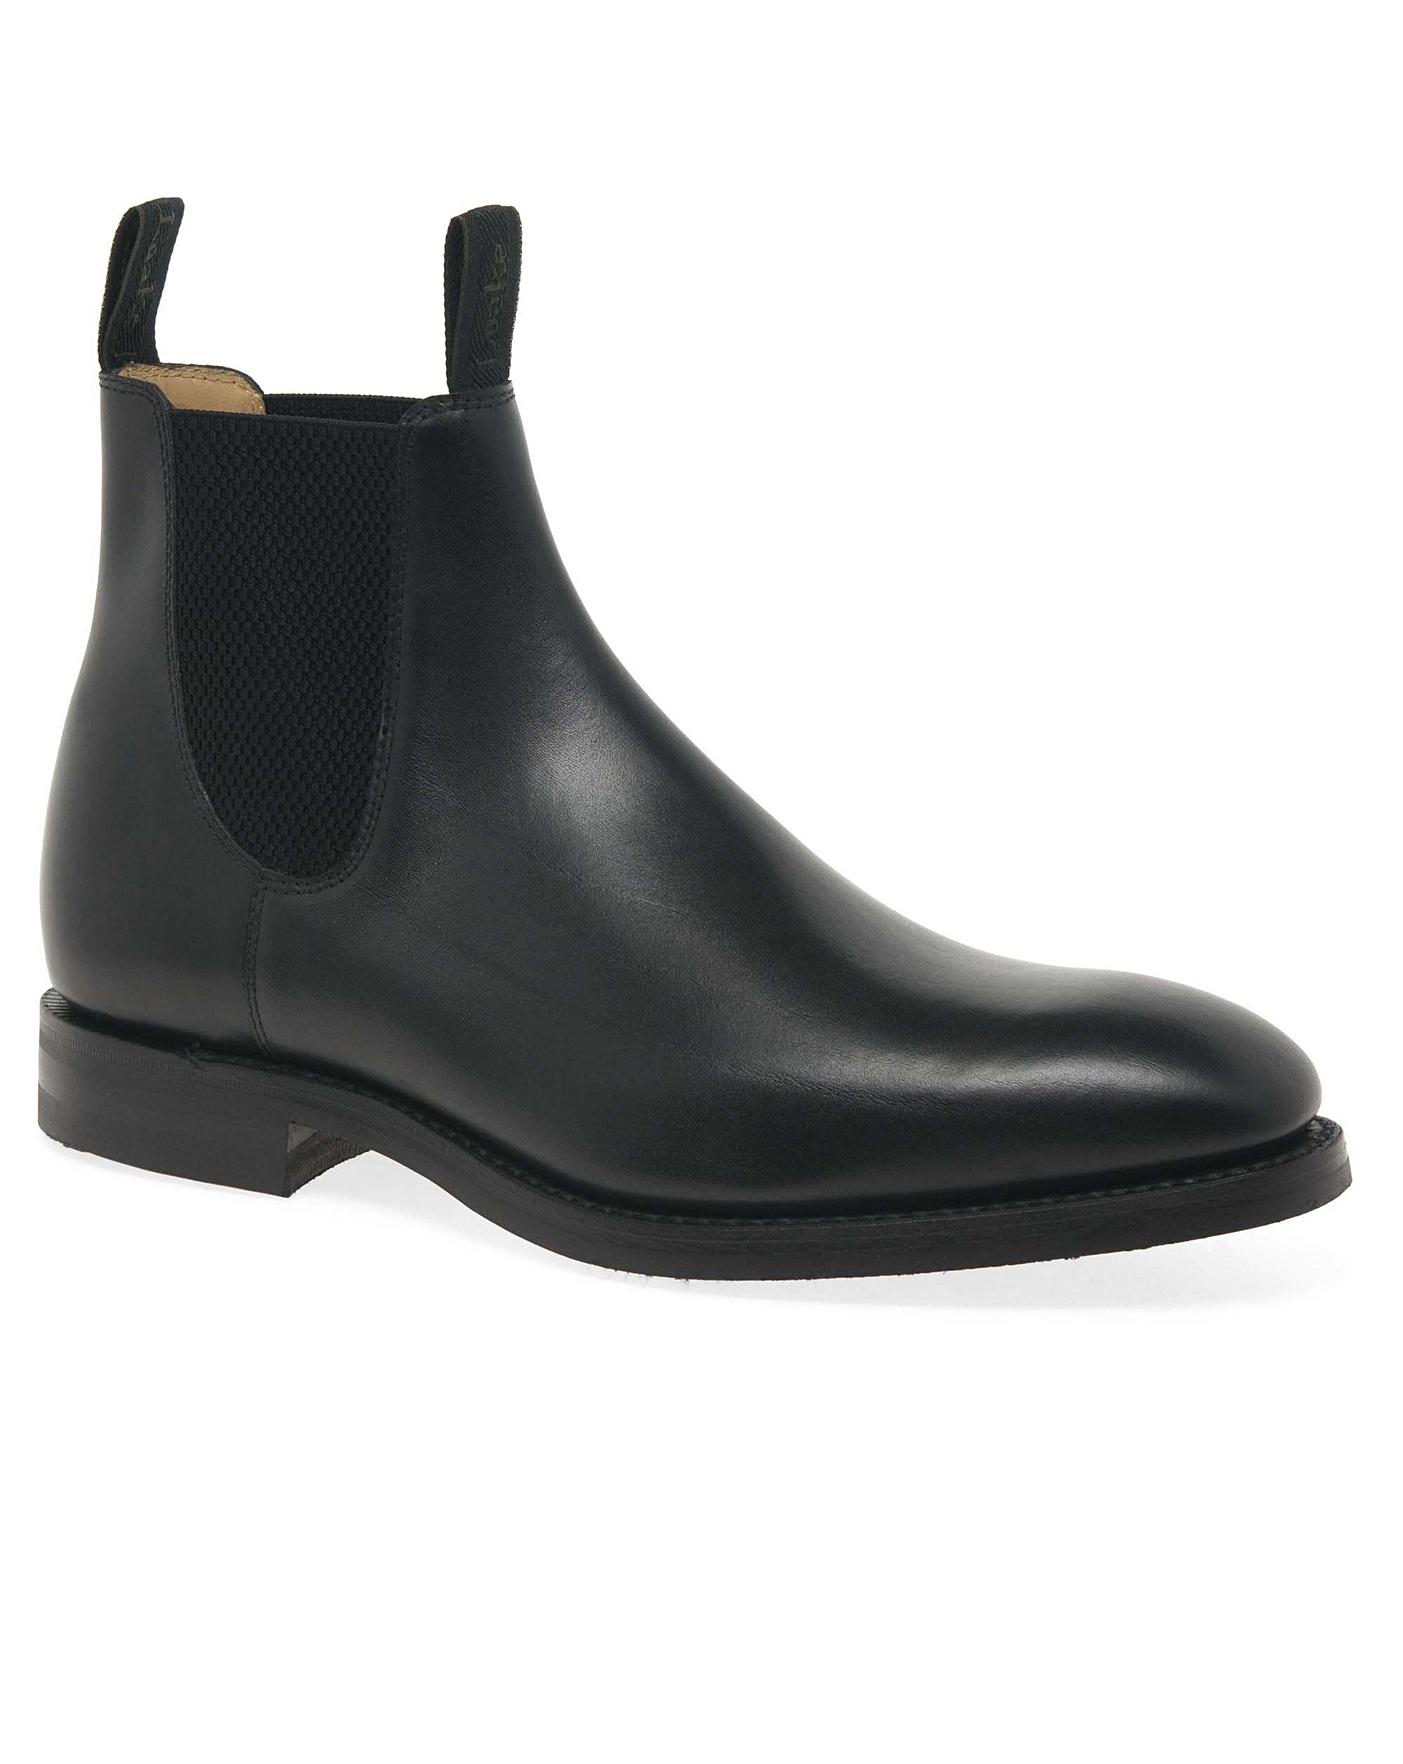 wide leather boots mens